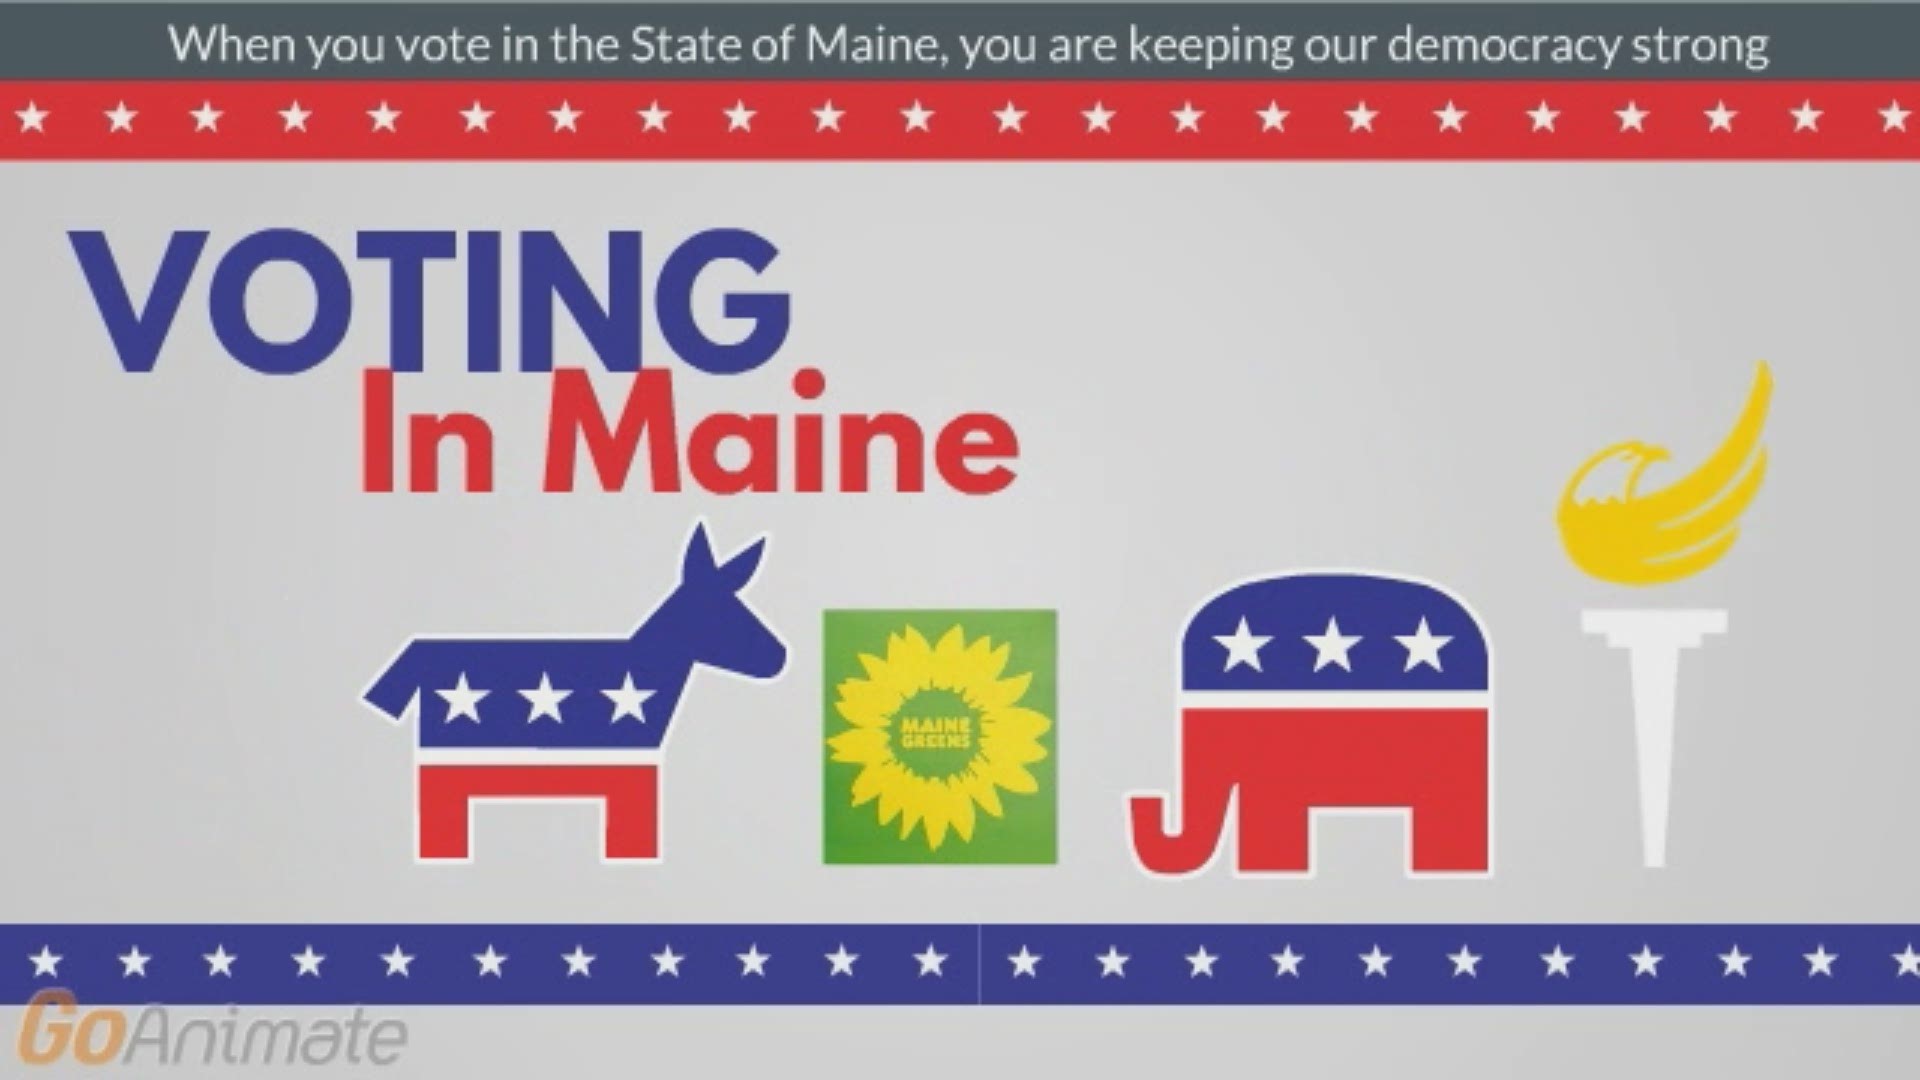 Maine Secretary of State Matt Dunlop uses animation to discuss how Mainers can register to vote